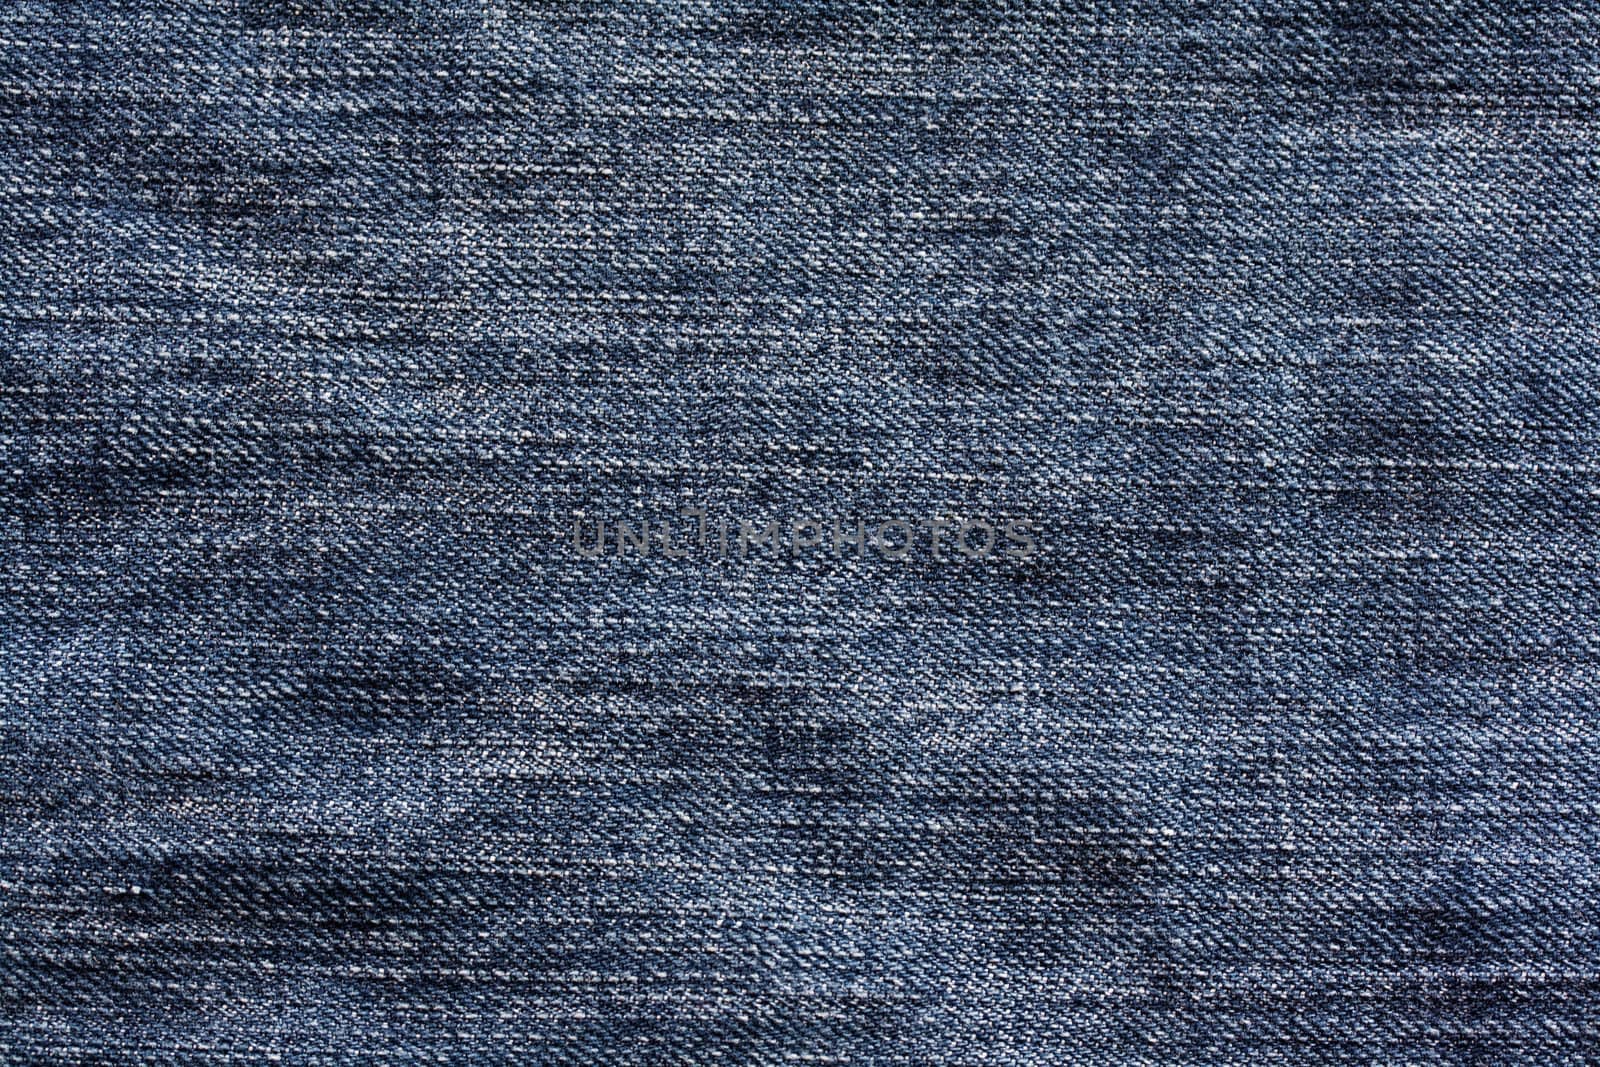 Close up shot of a pair of jeans so you can see the texture